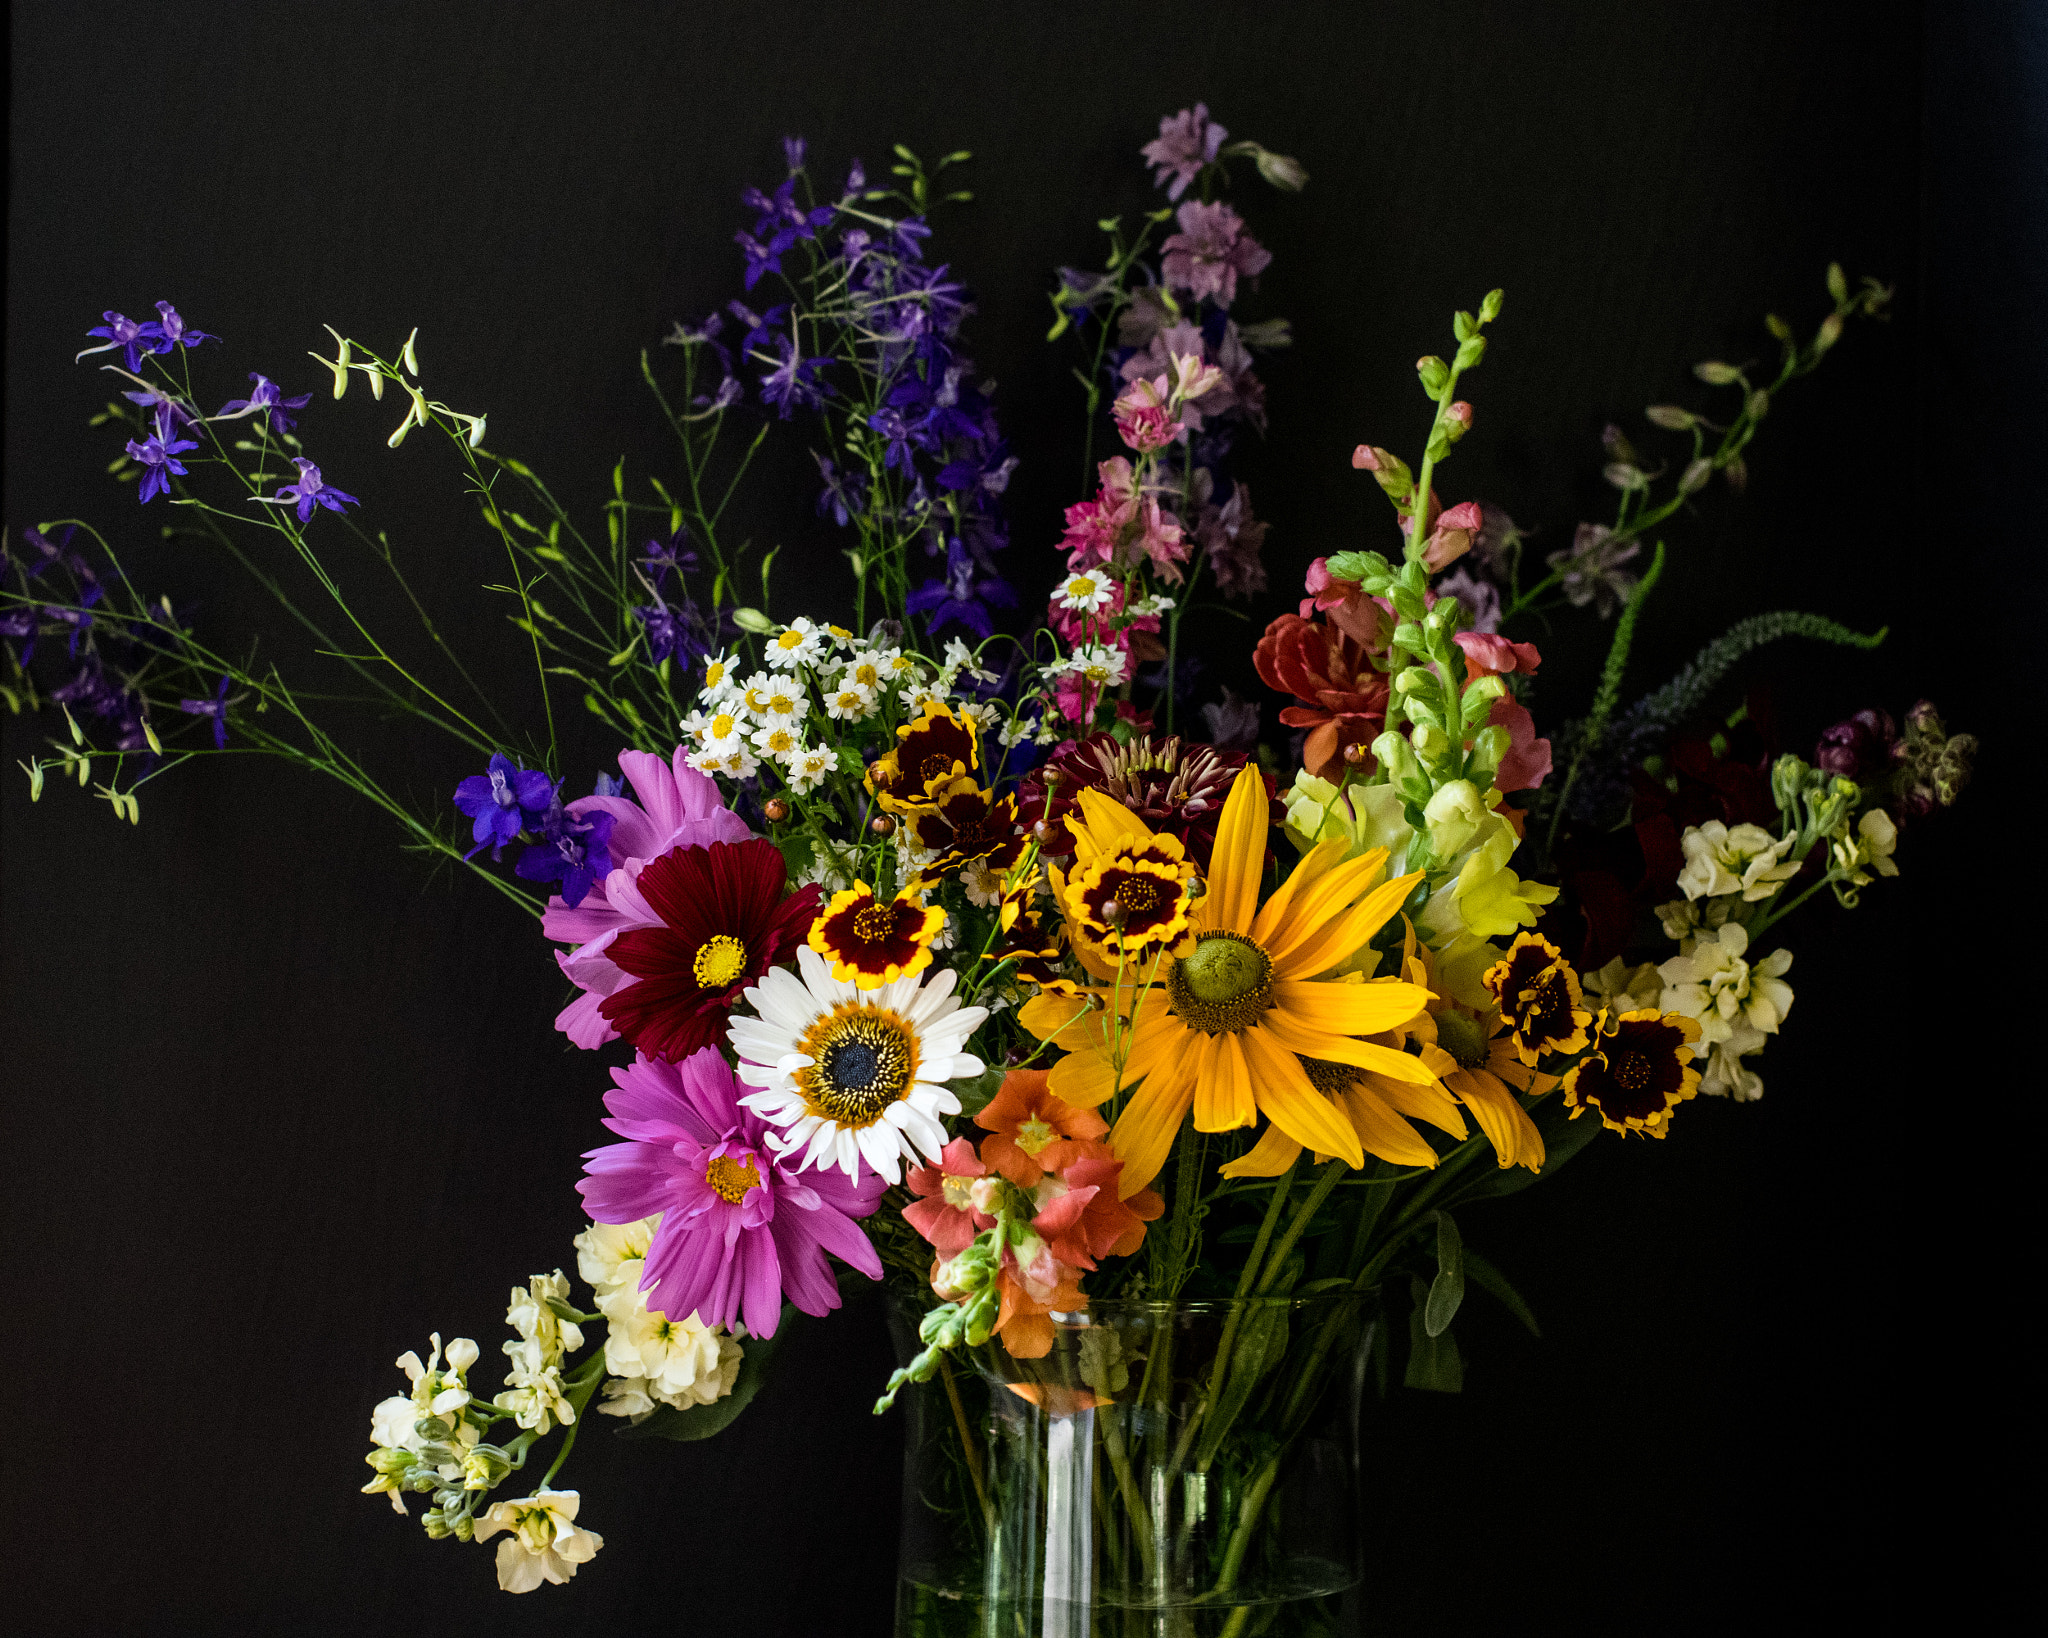 Pentax K-3 sample photo. Flowers from the farmer market photography